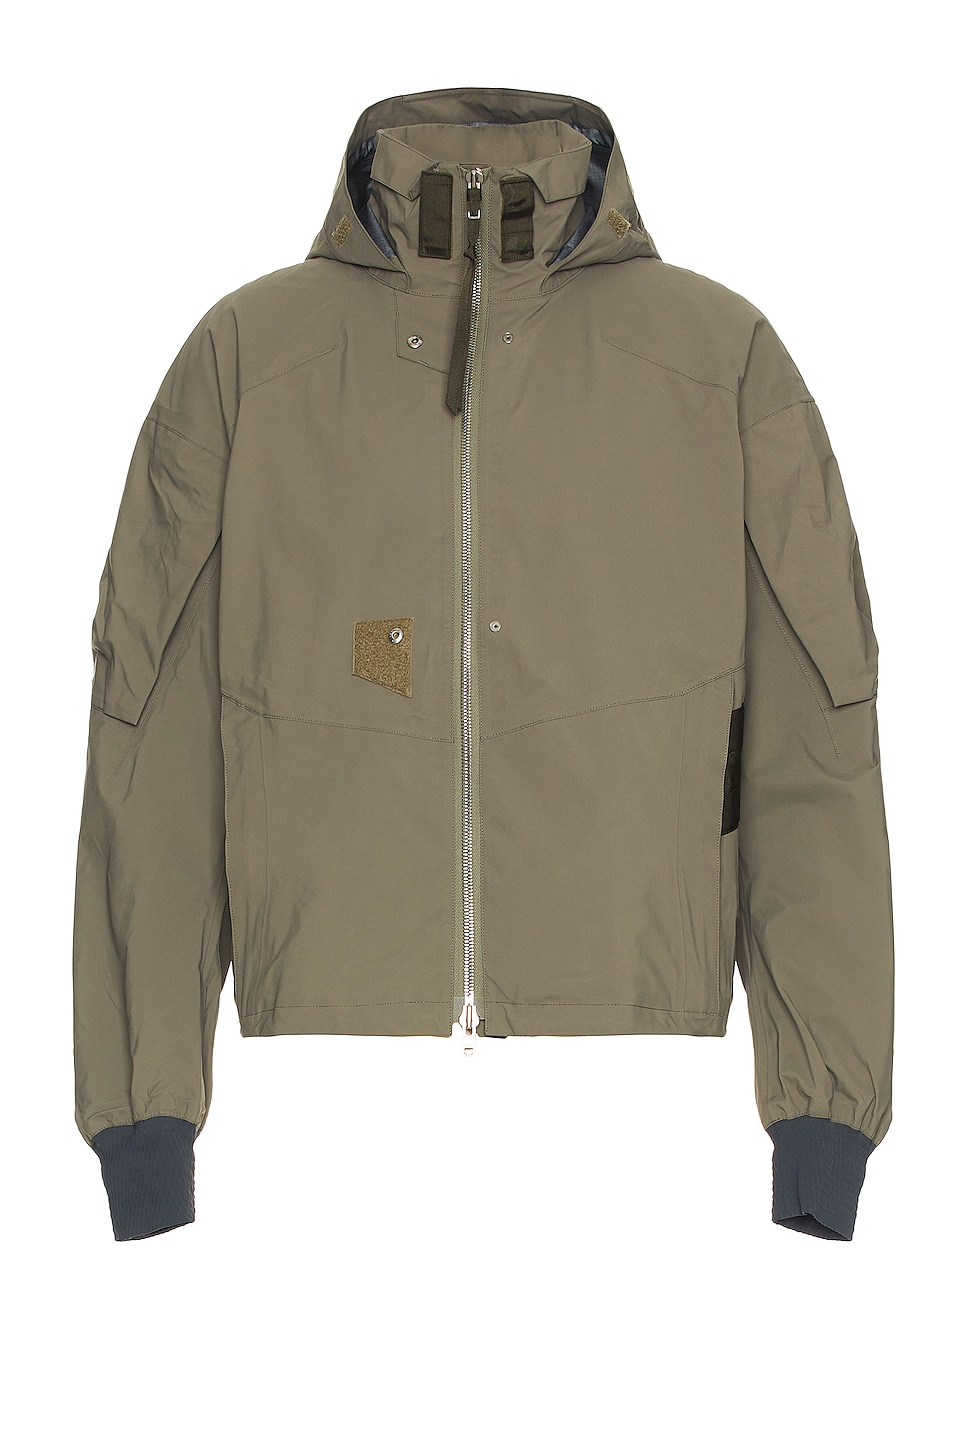 Image 1 of Acronym J110ts-gtv 3l Gore-tex Pro Tec Sys Jacket in Alpha Green